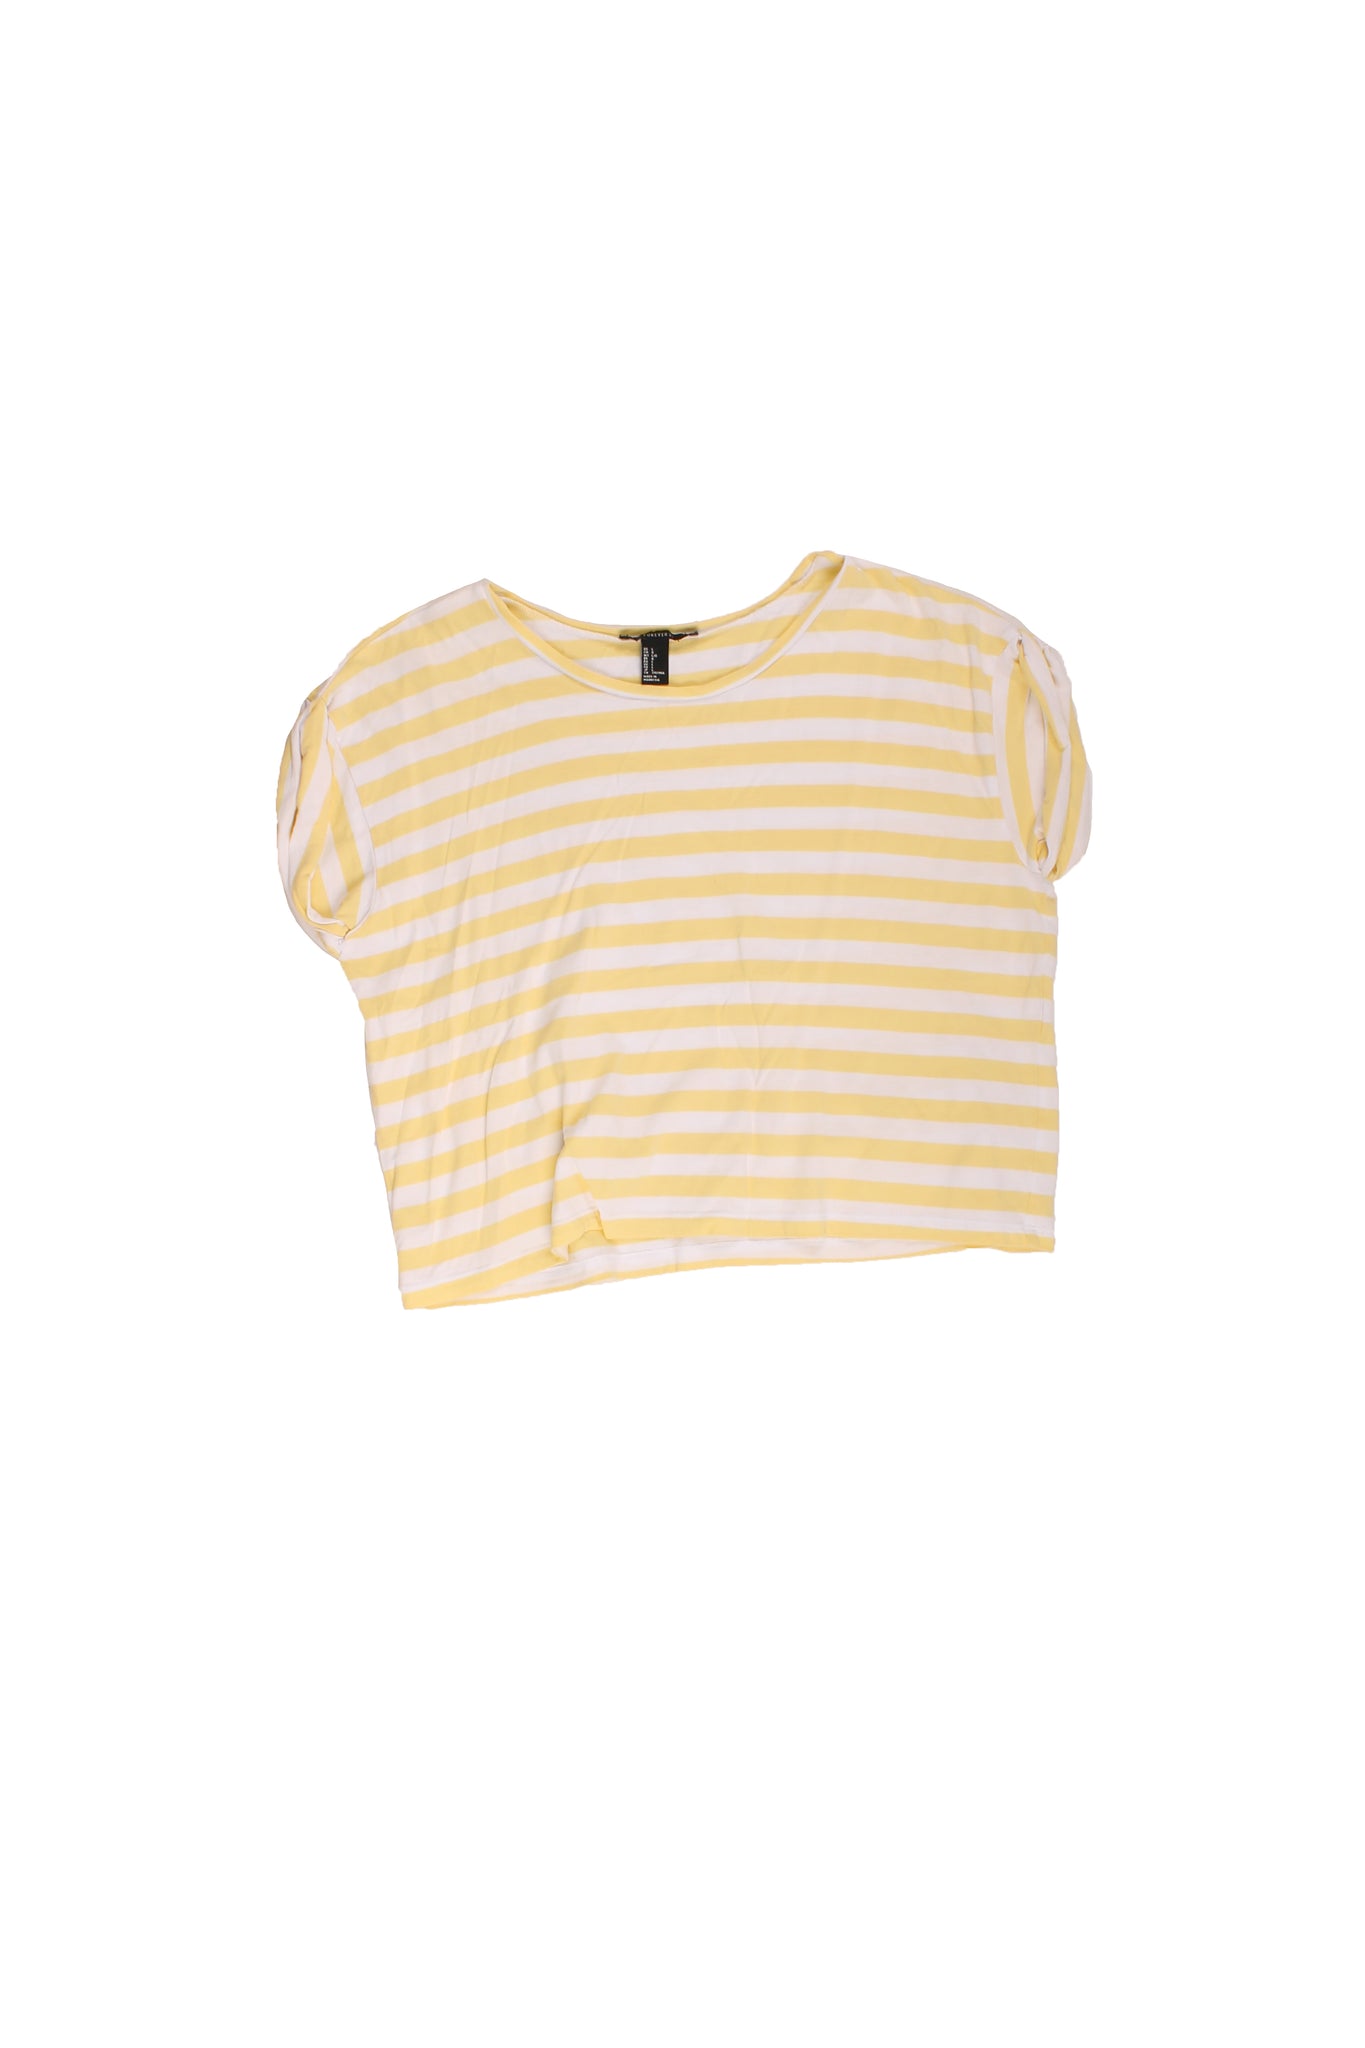 FOREVER 21 - Blusa Cropped Lineas Amarillo Blanco